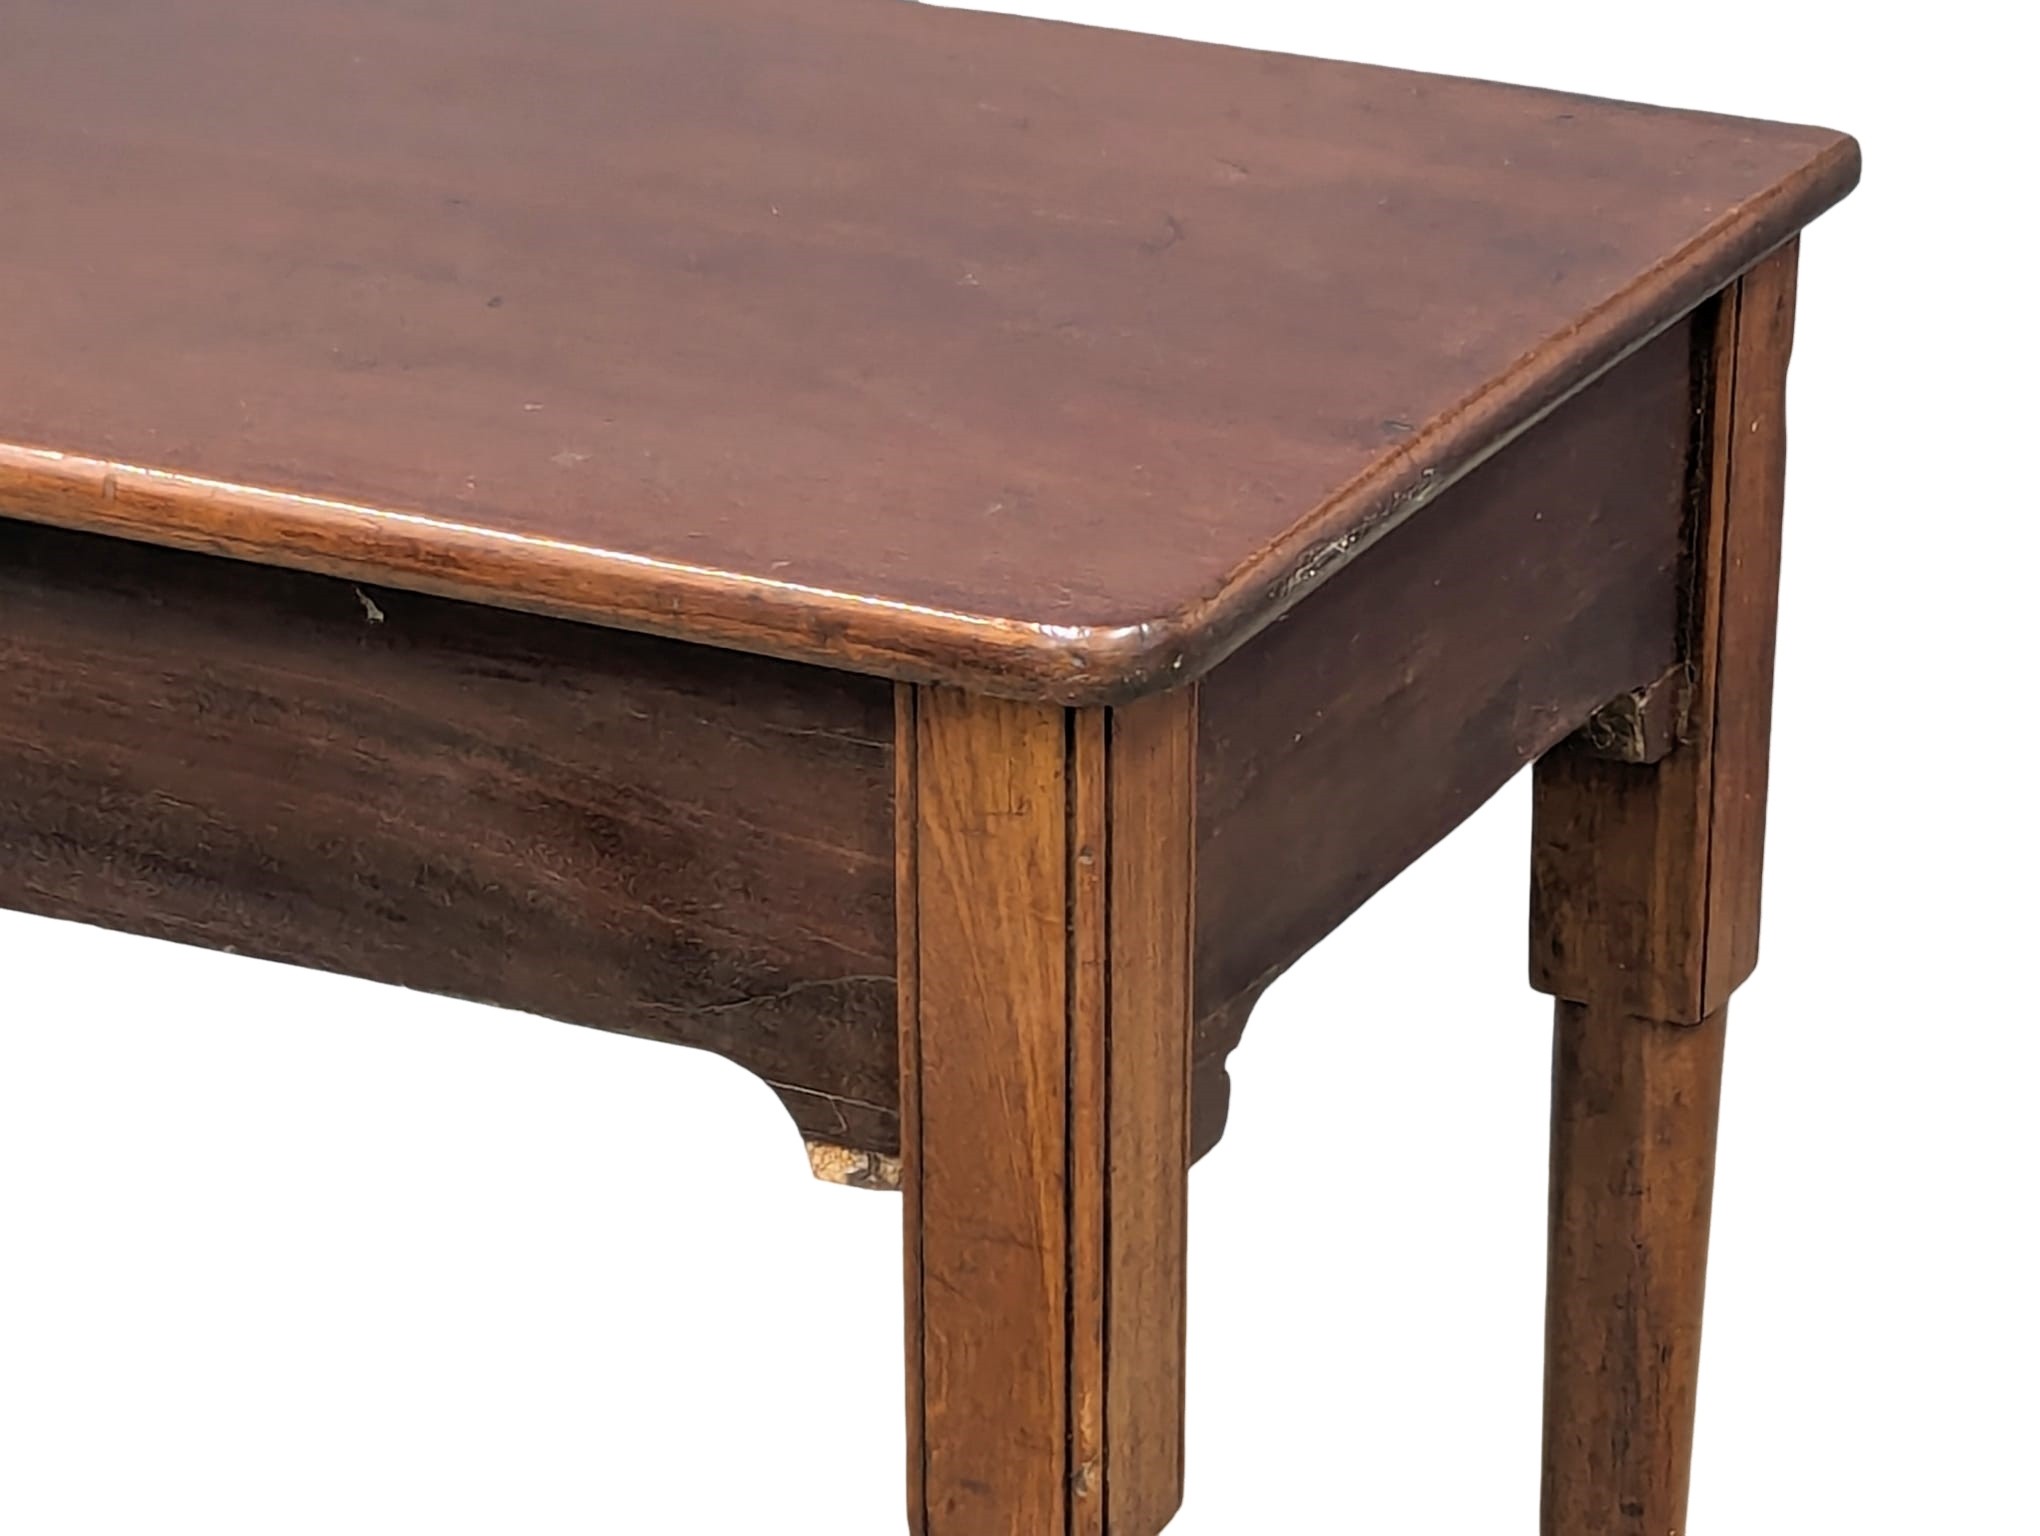 A George II 18th Century mahogany side table. Circa 1740-1750. With restorations. 81x40x71cm - Image 5 of 5